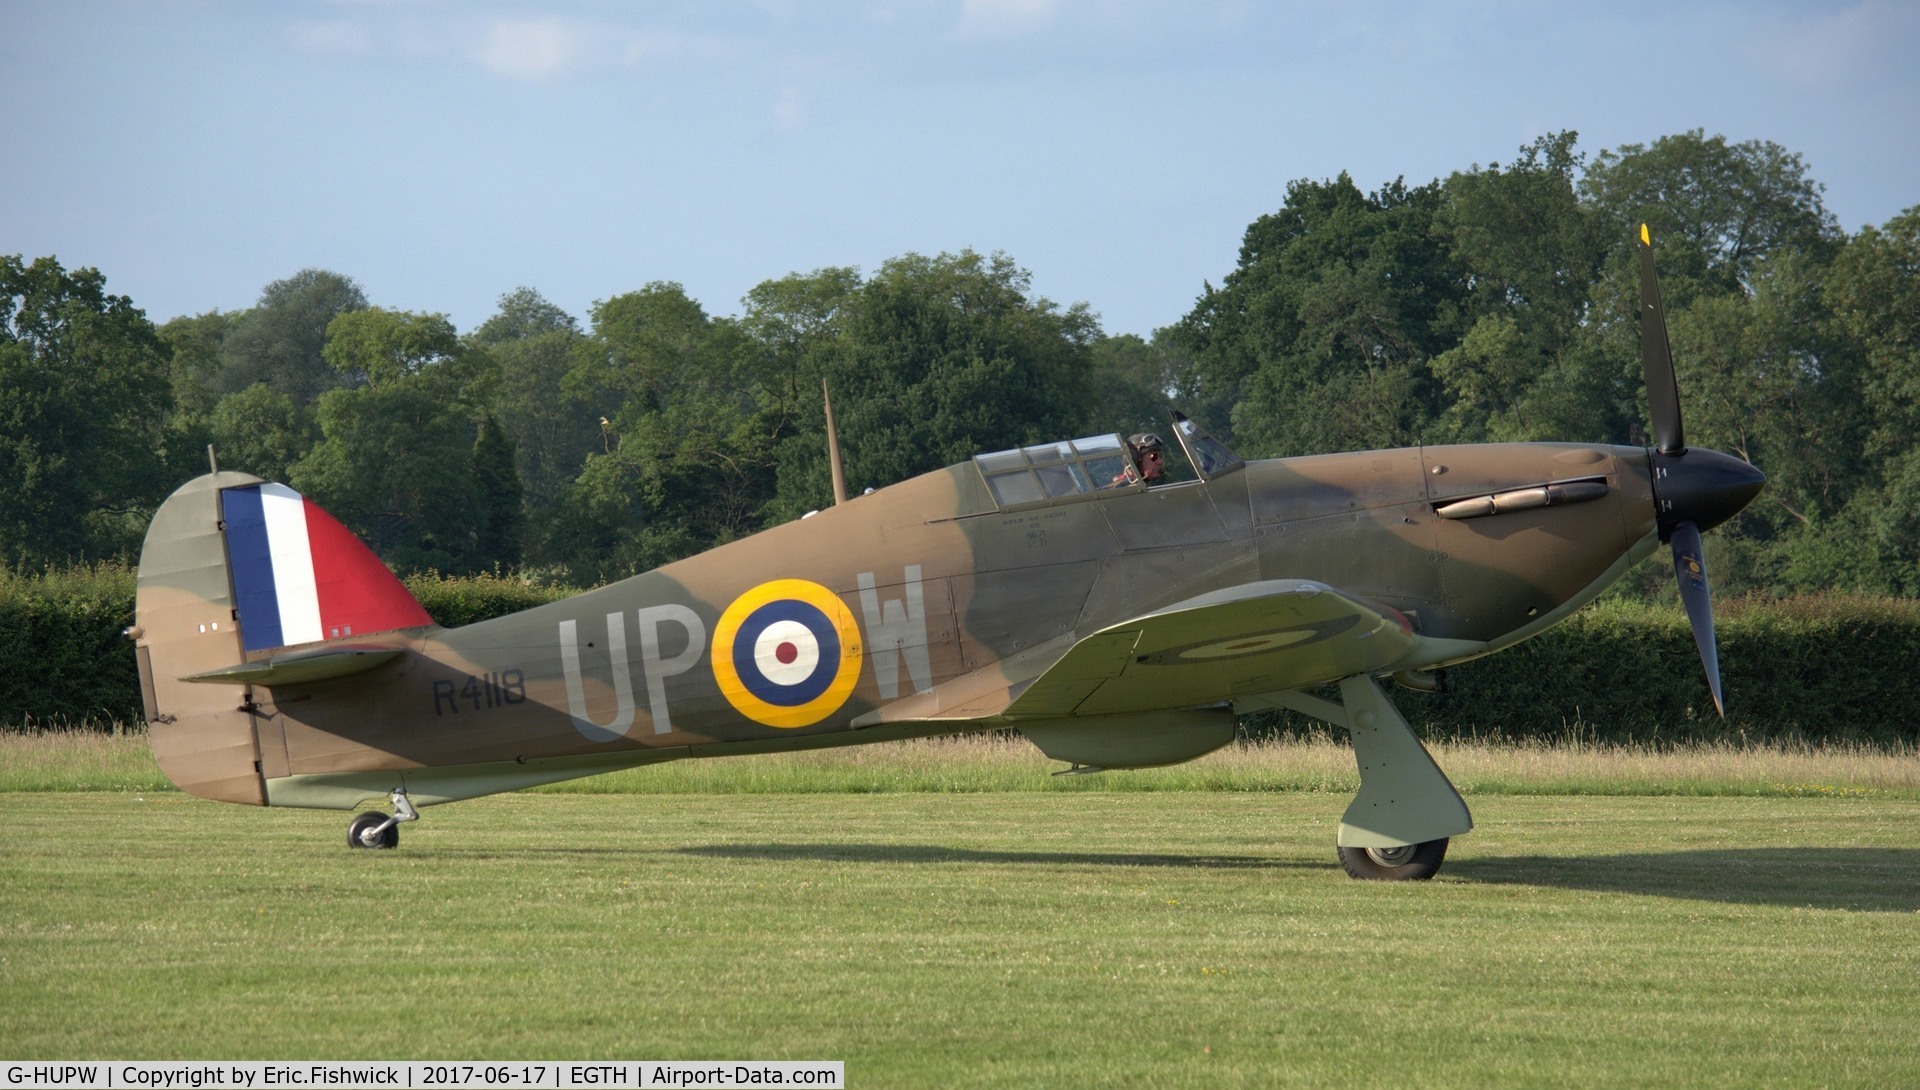 G-HUPW, 1940 Hawker Hurricane I C/N G592301, x. R4118 at the epic Evening Airshow, The Shuttleworth Collection, June, 2017